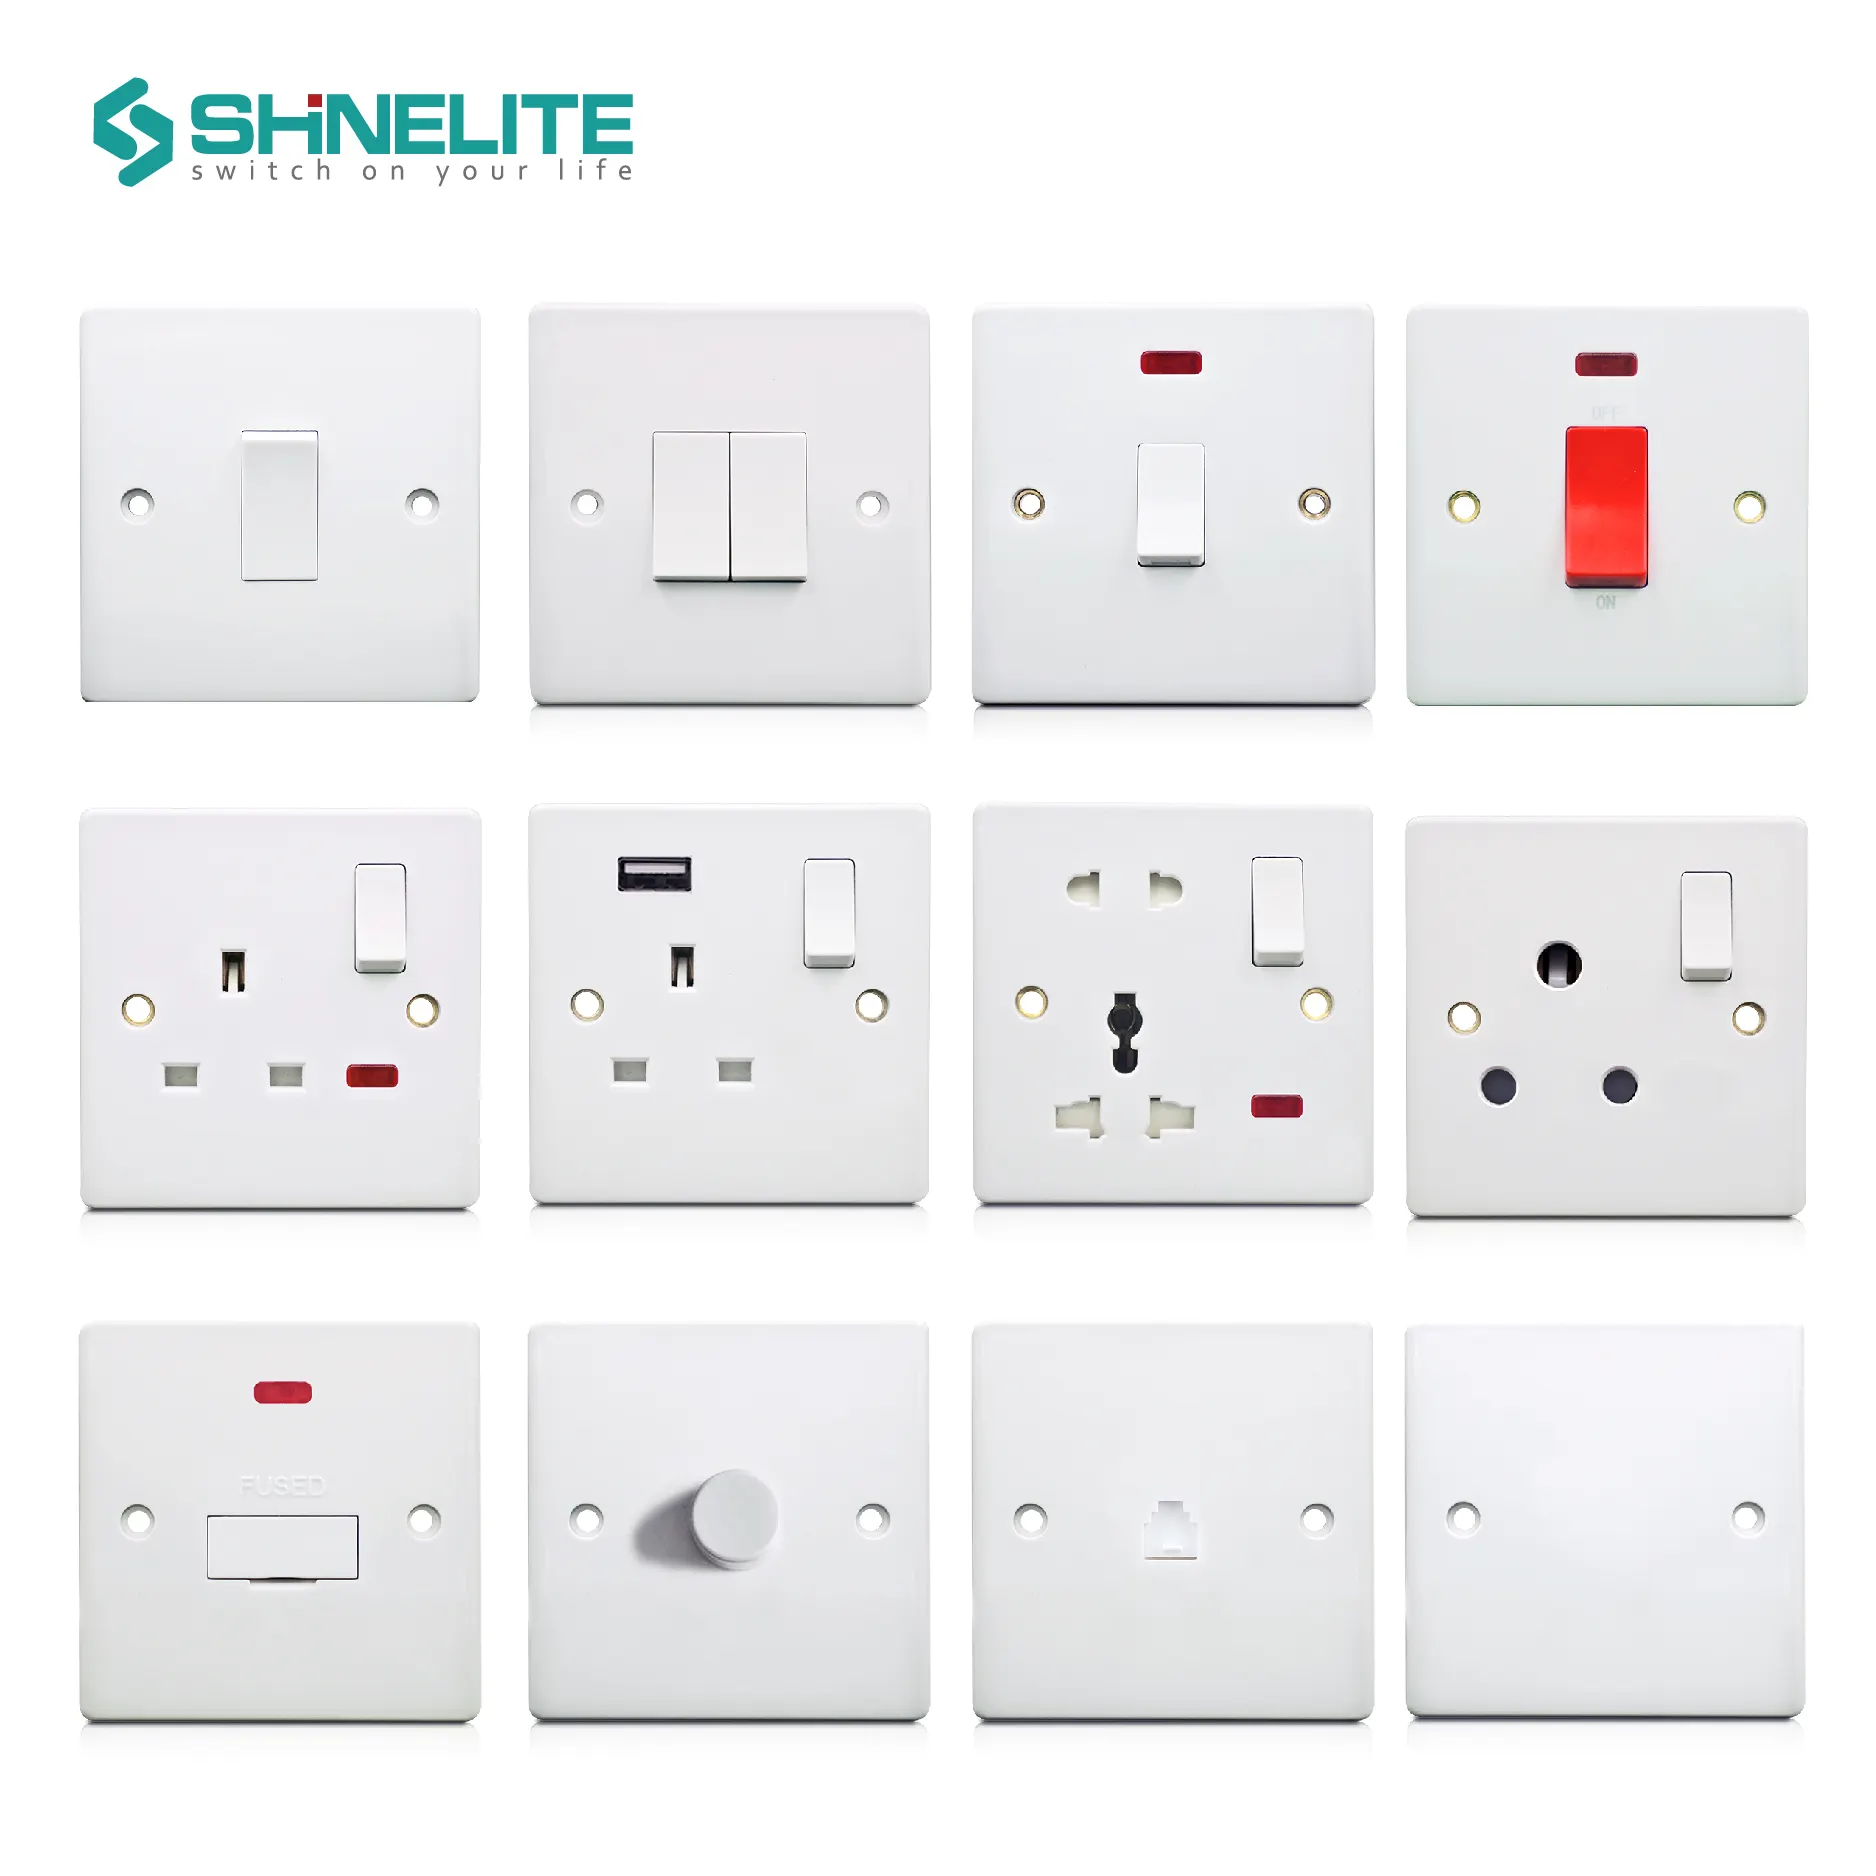 Shinelite hot selling CE CB GCC certificate approved british standard bakelite electrical wall switch light switch